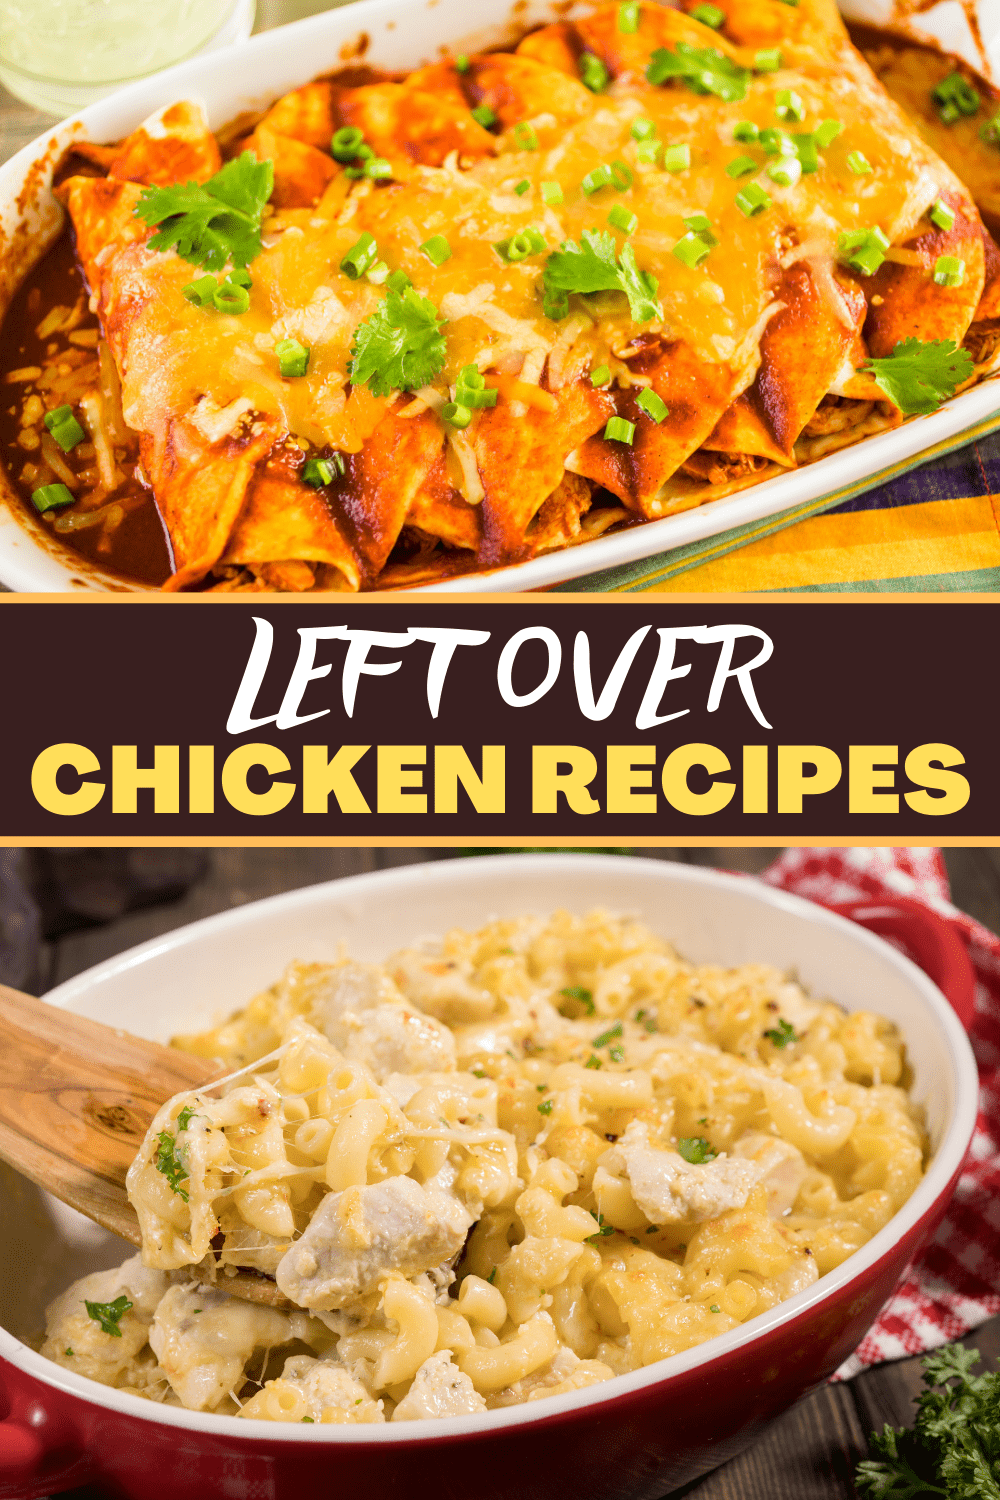 24 Easy Leftover Chicken Recipes Insanely Good